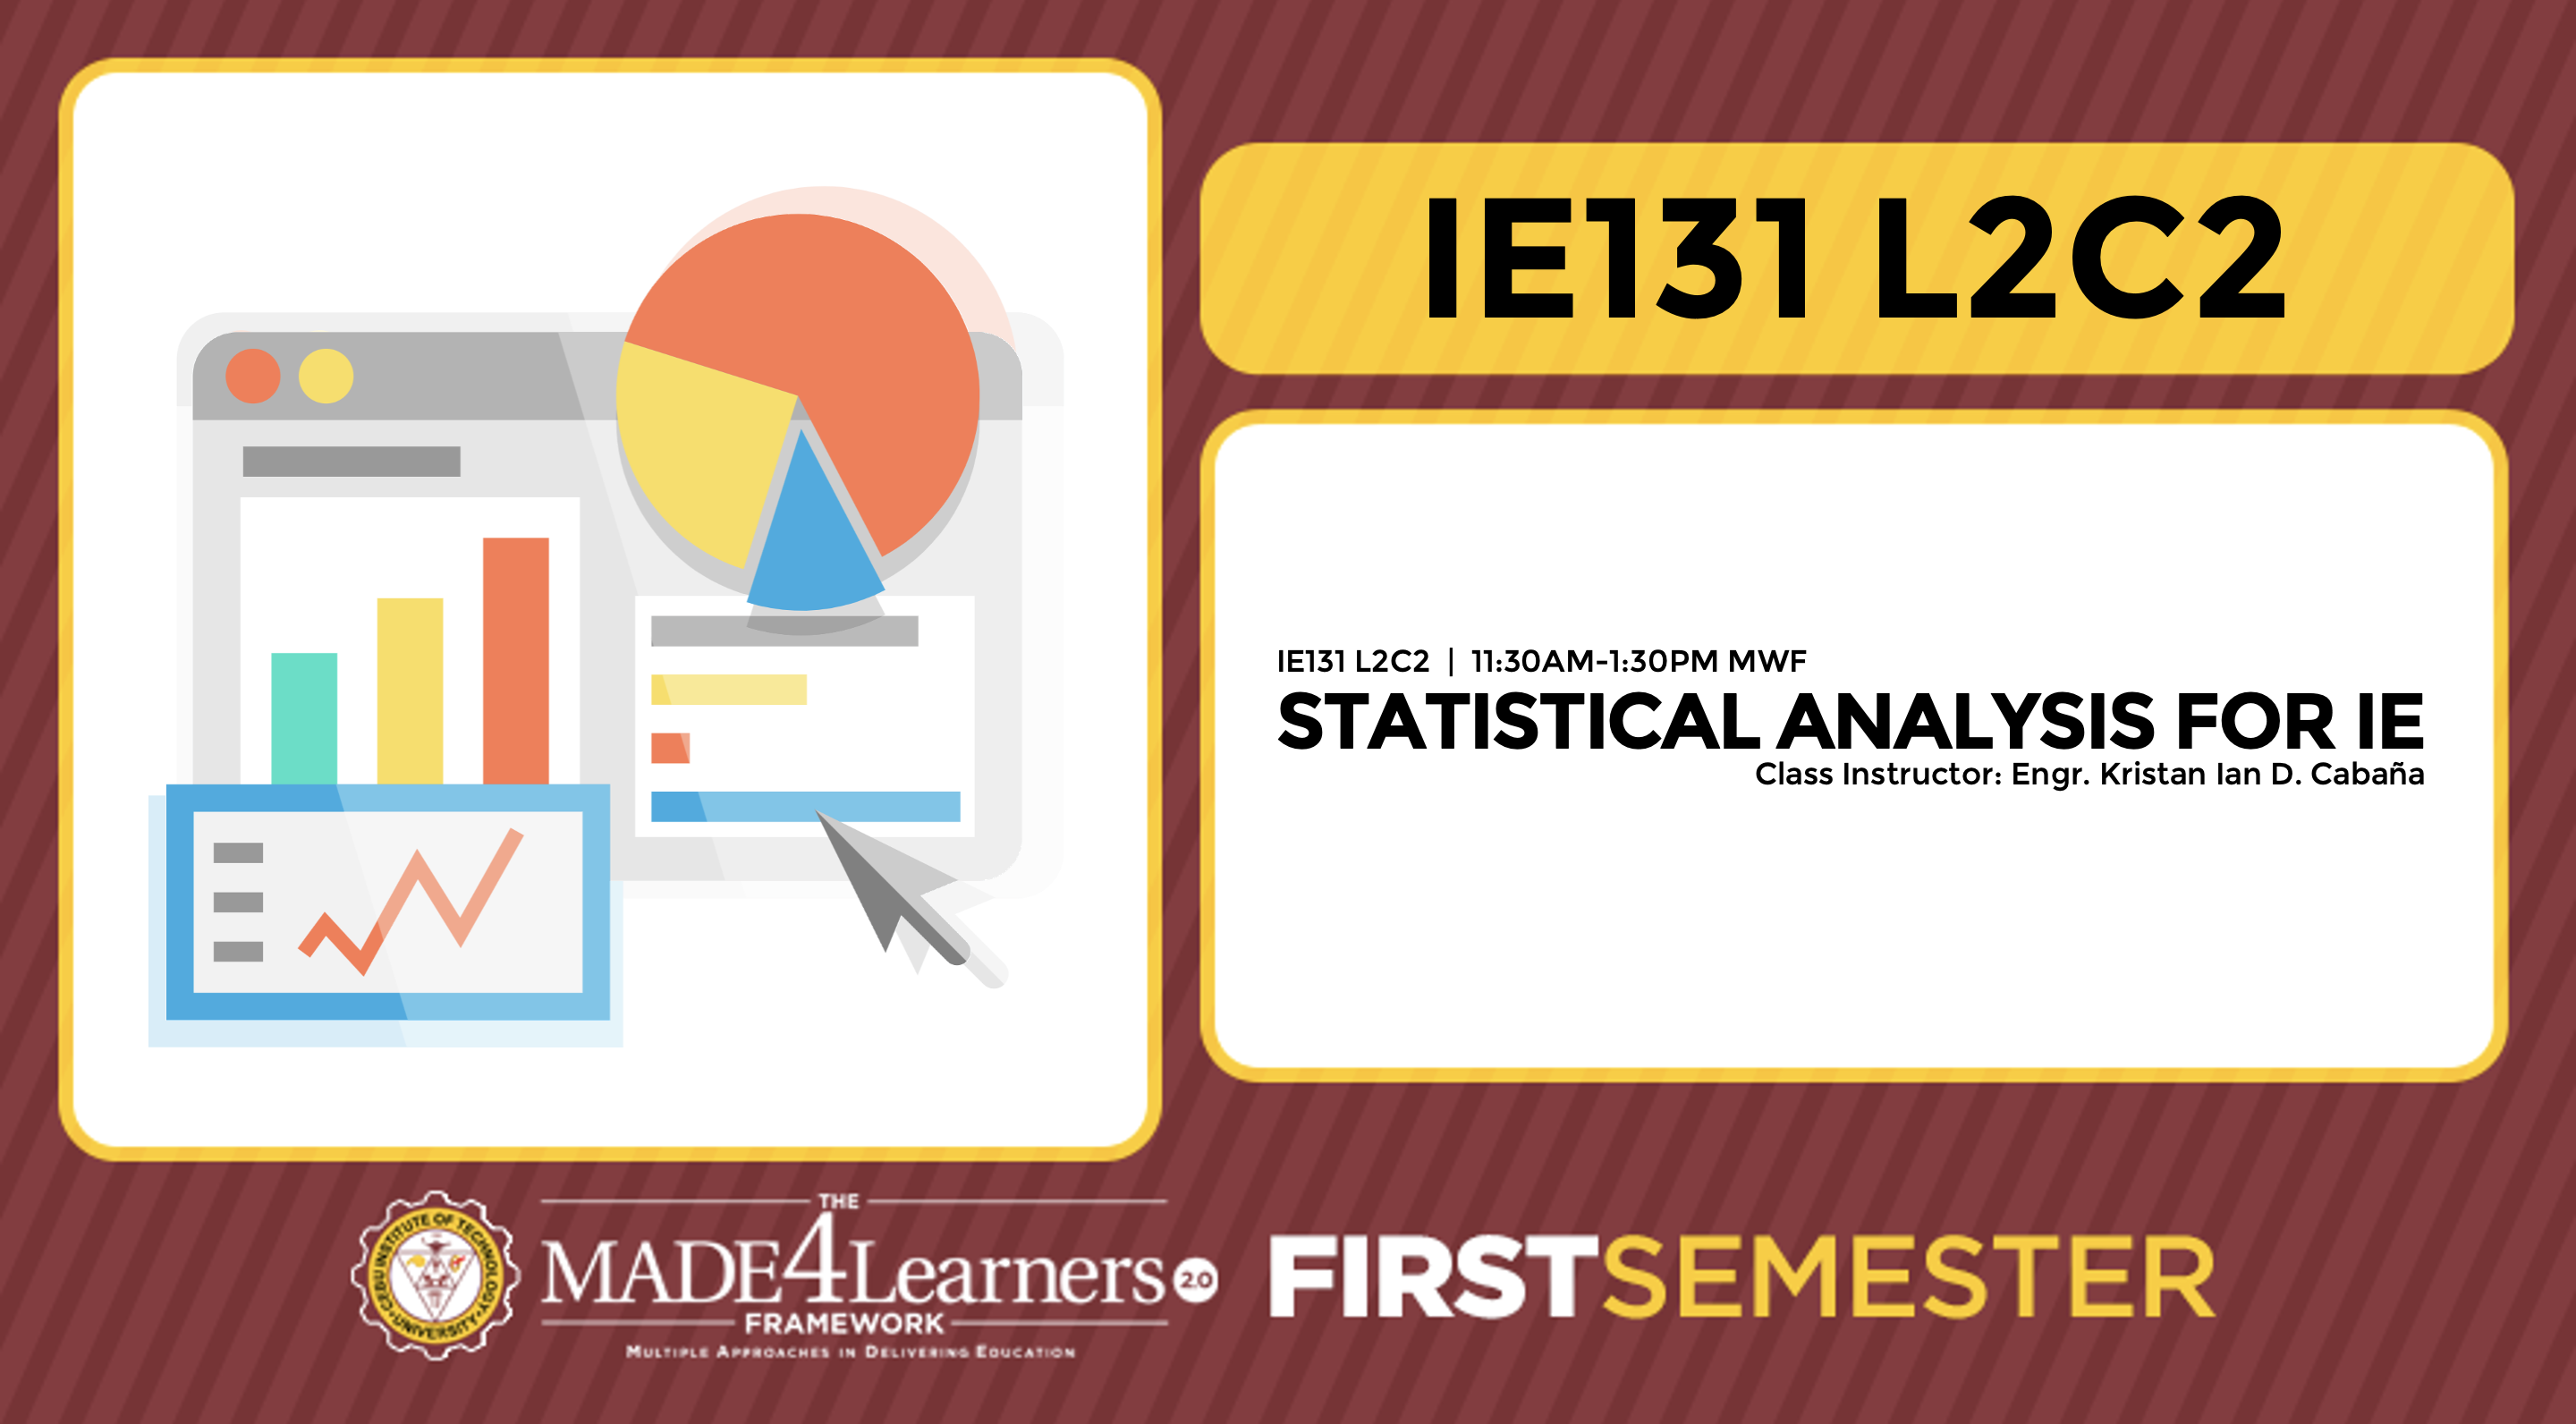 IE131 (PST) Statistical Analysis for IE